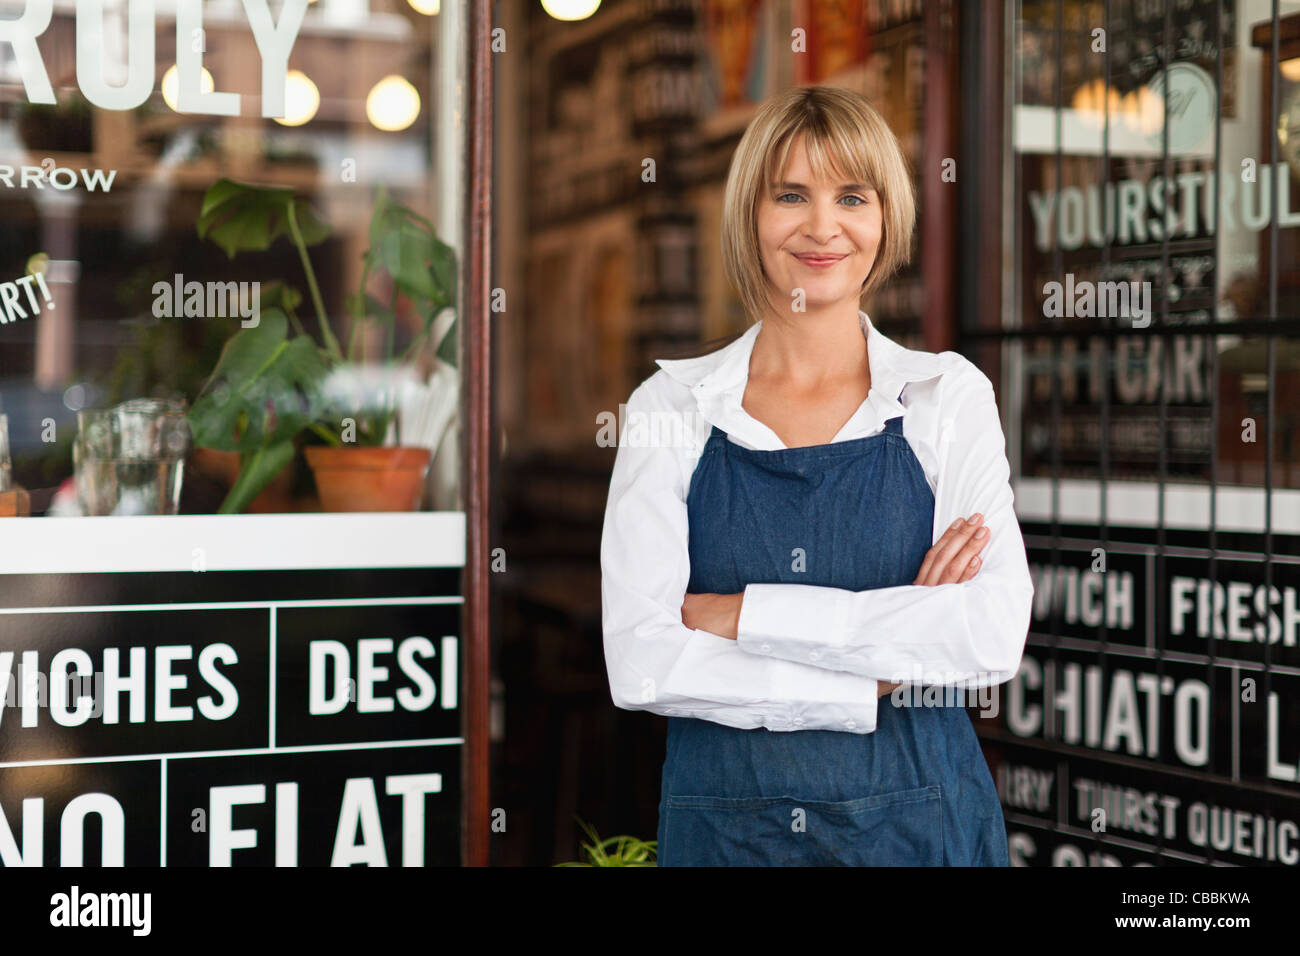 Smiling waitress standing in cafe Stock Photo